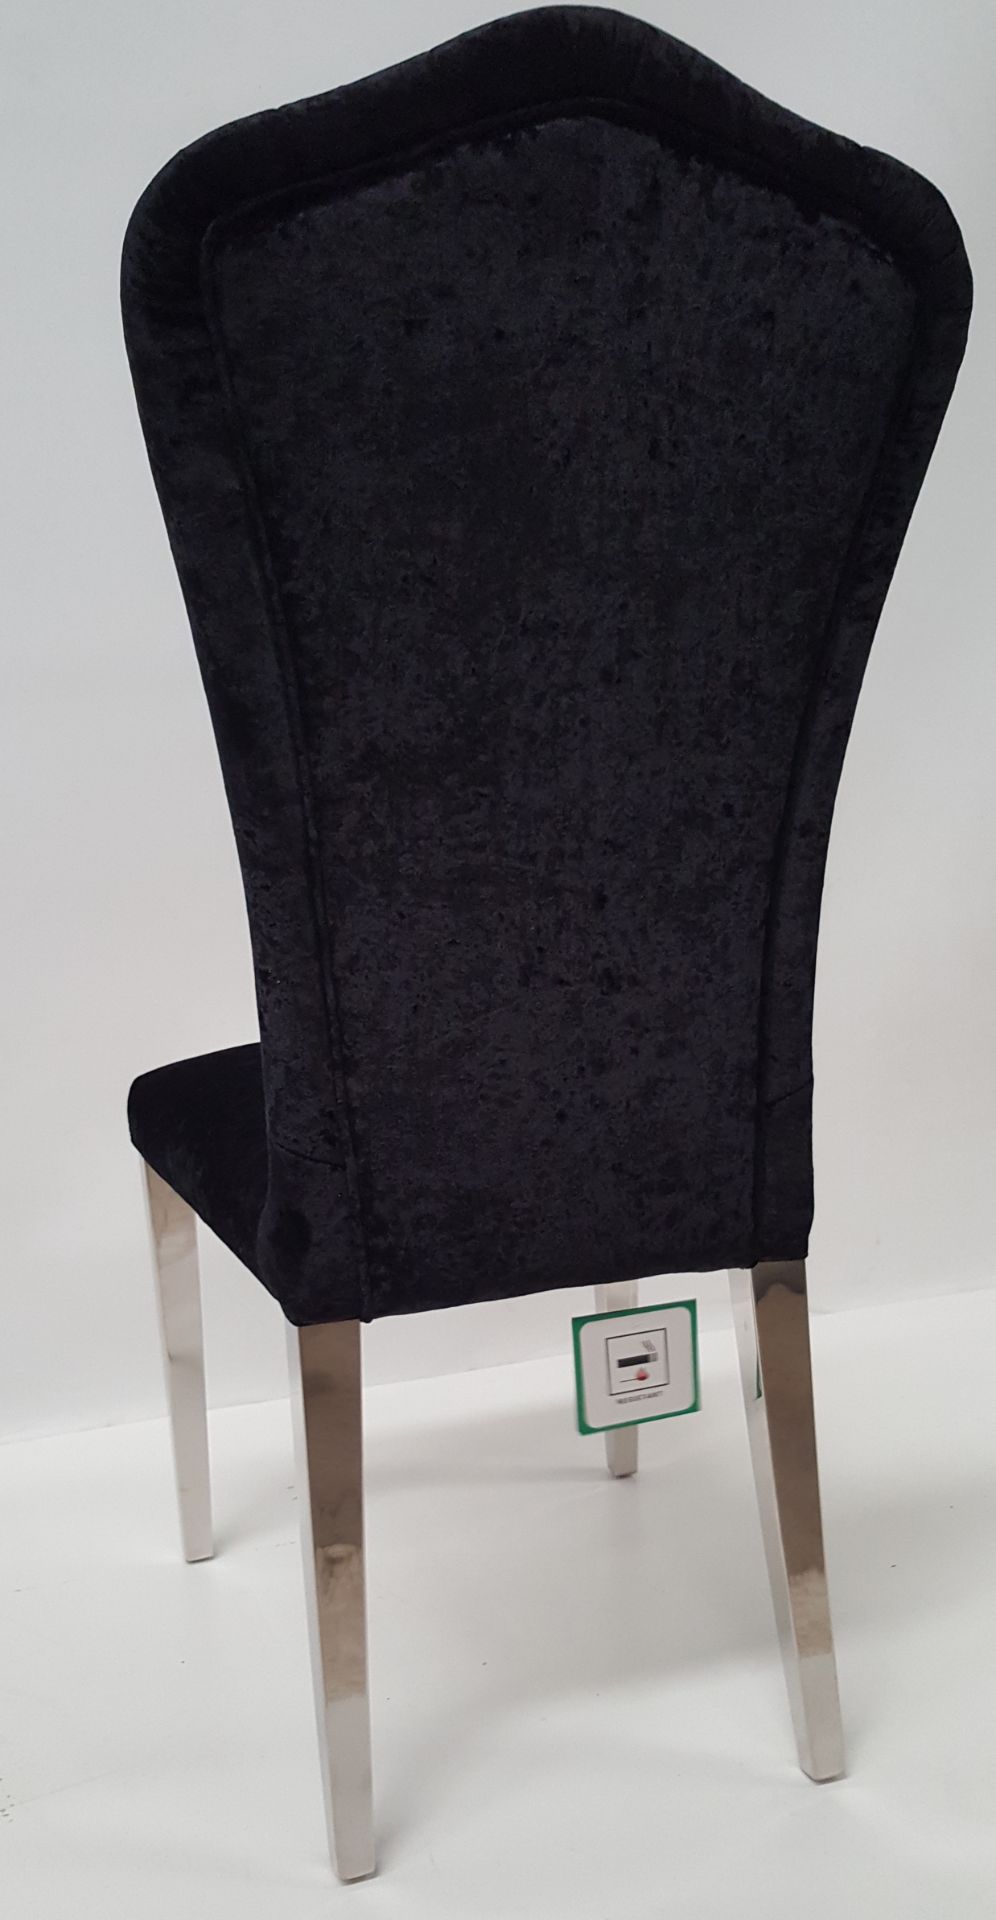 6 x STYLISH BLACK CRUSHED VELVET DINING TABLE CHAIRS - CL408 - Location: Altrincham WA14 - Image 2 of 6